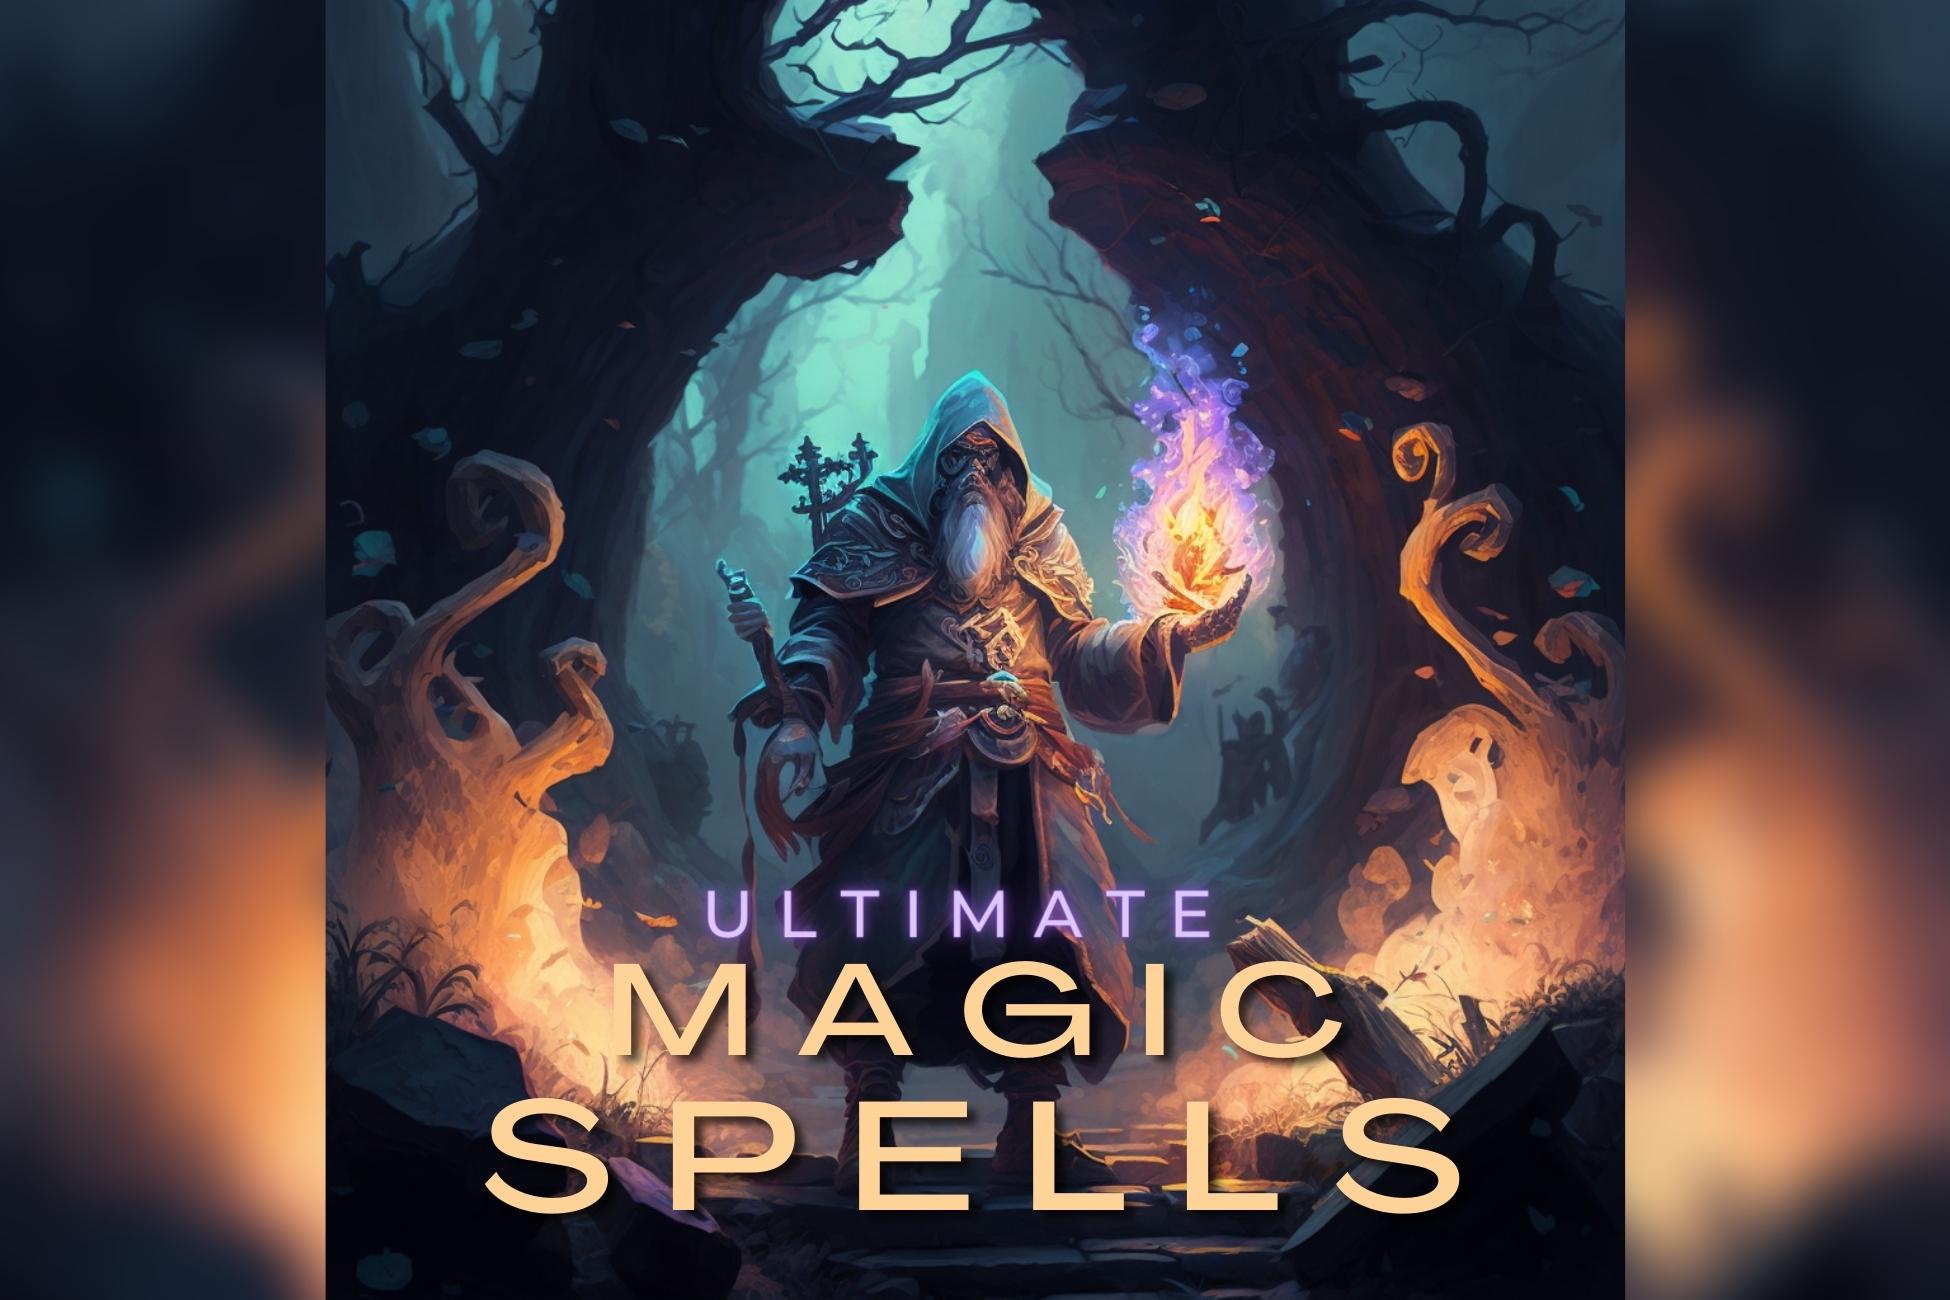 The Ultimate Magic Spells Sound Effects Pack